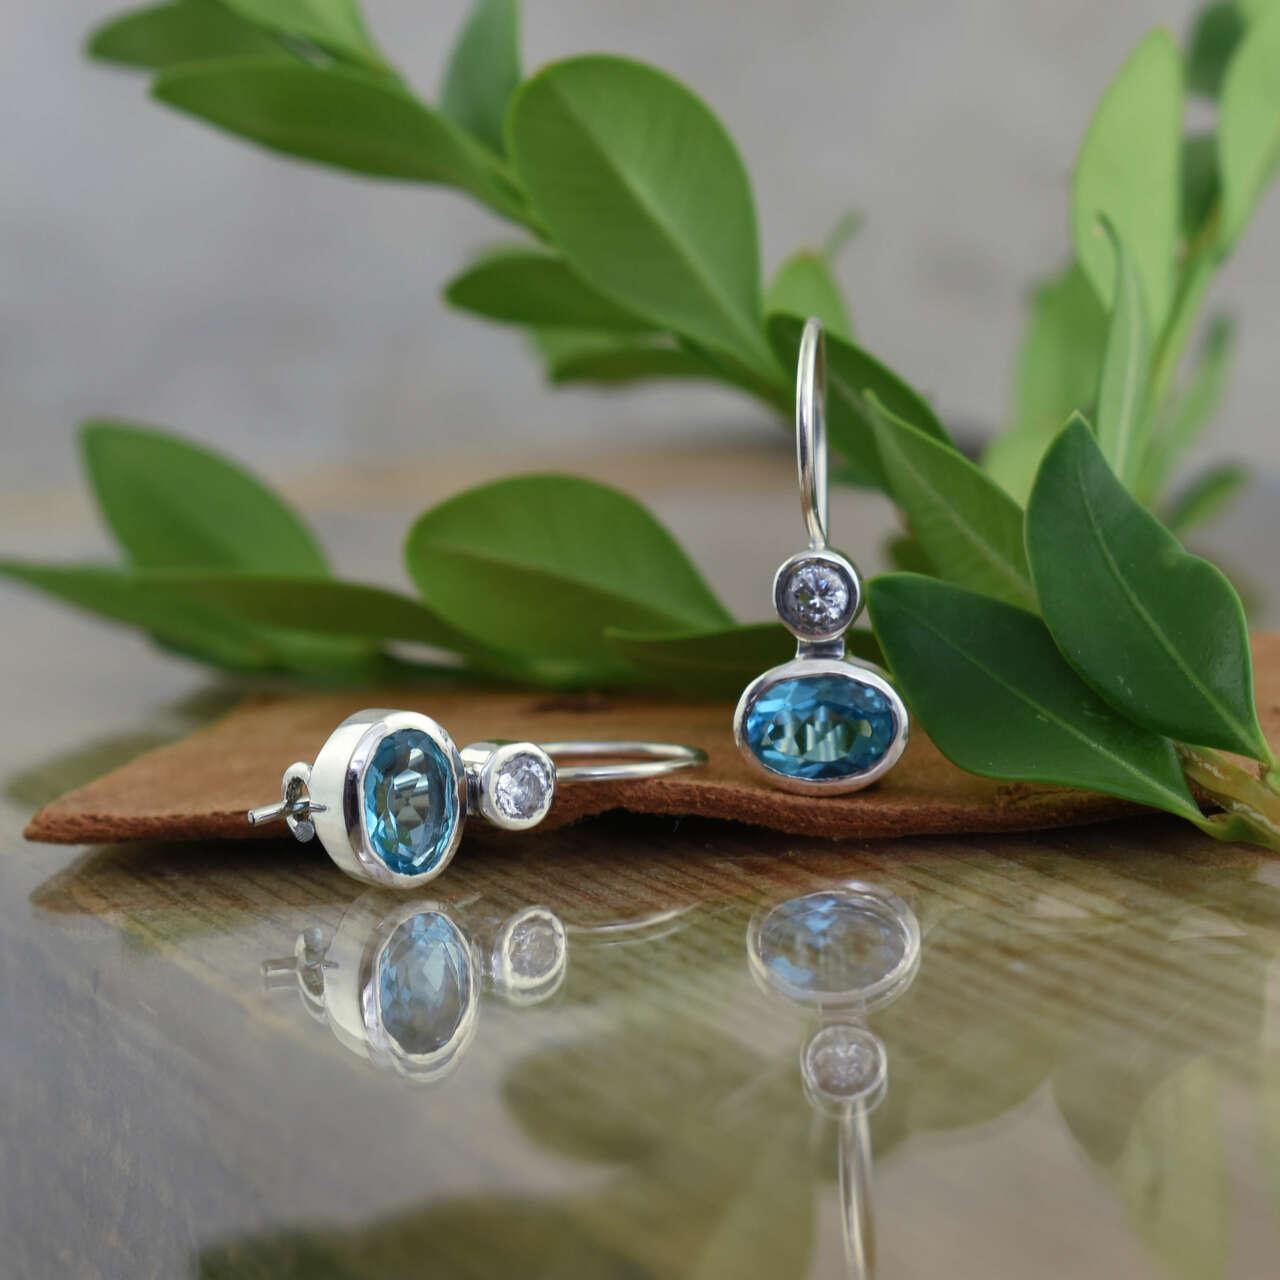 Blue Grotto Earrings in handcrafted sterling silver and CZ